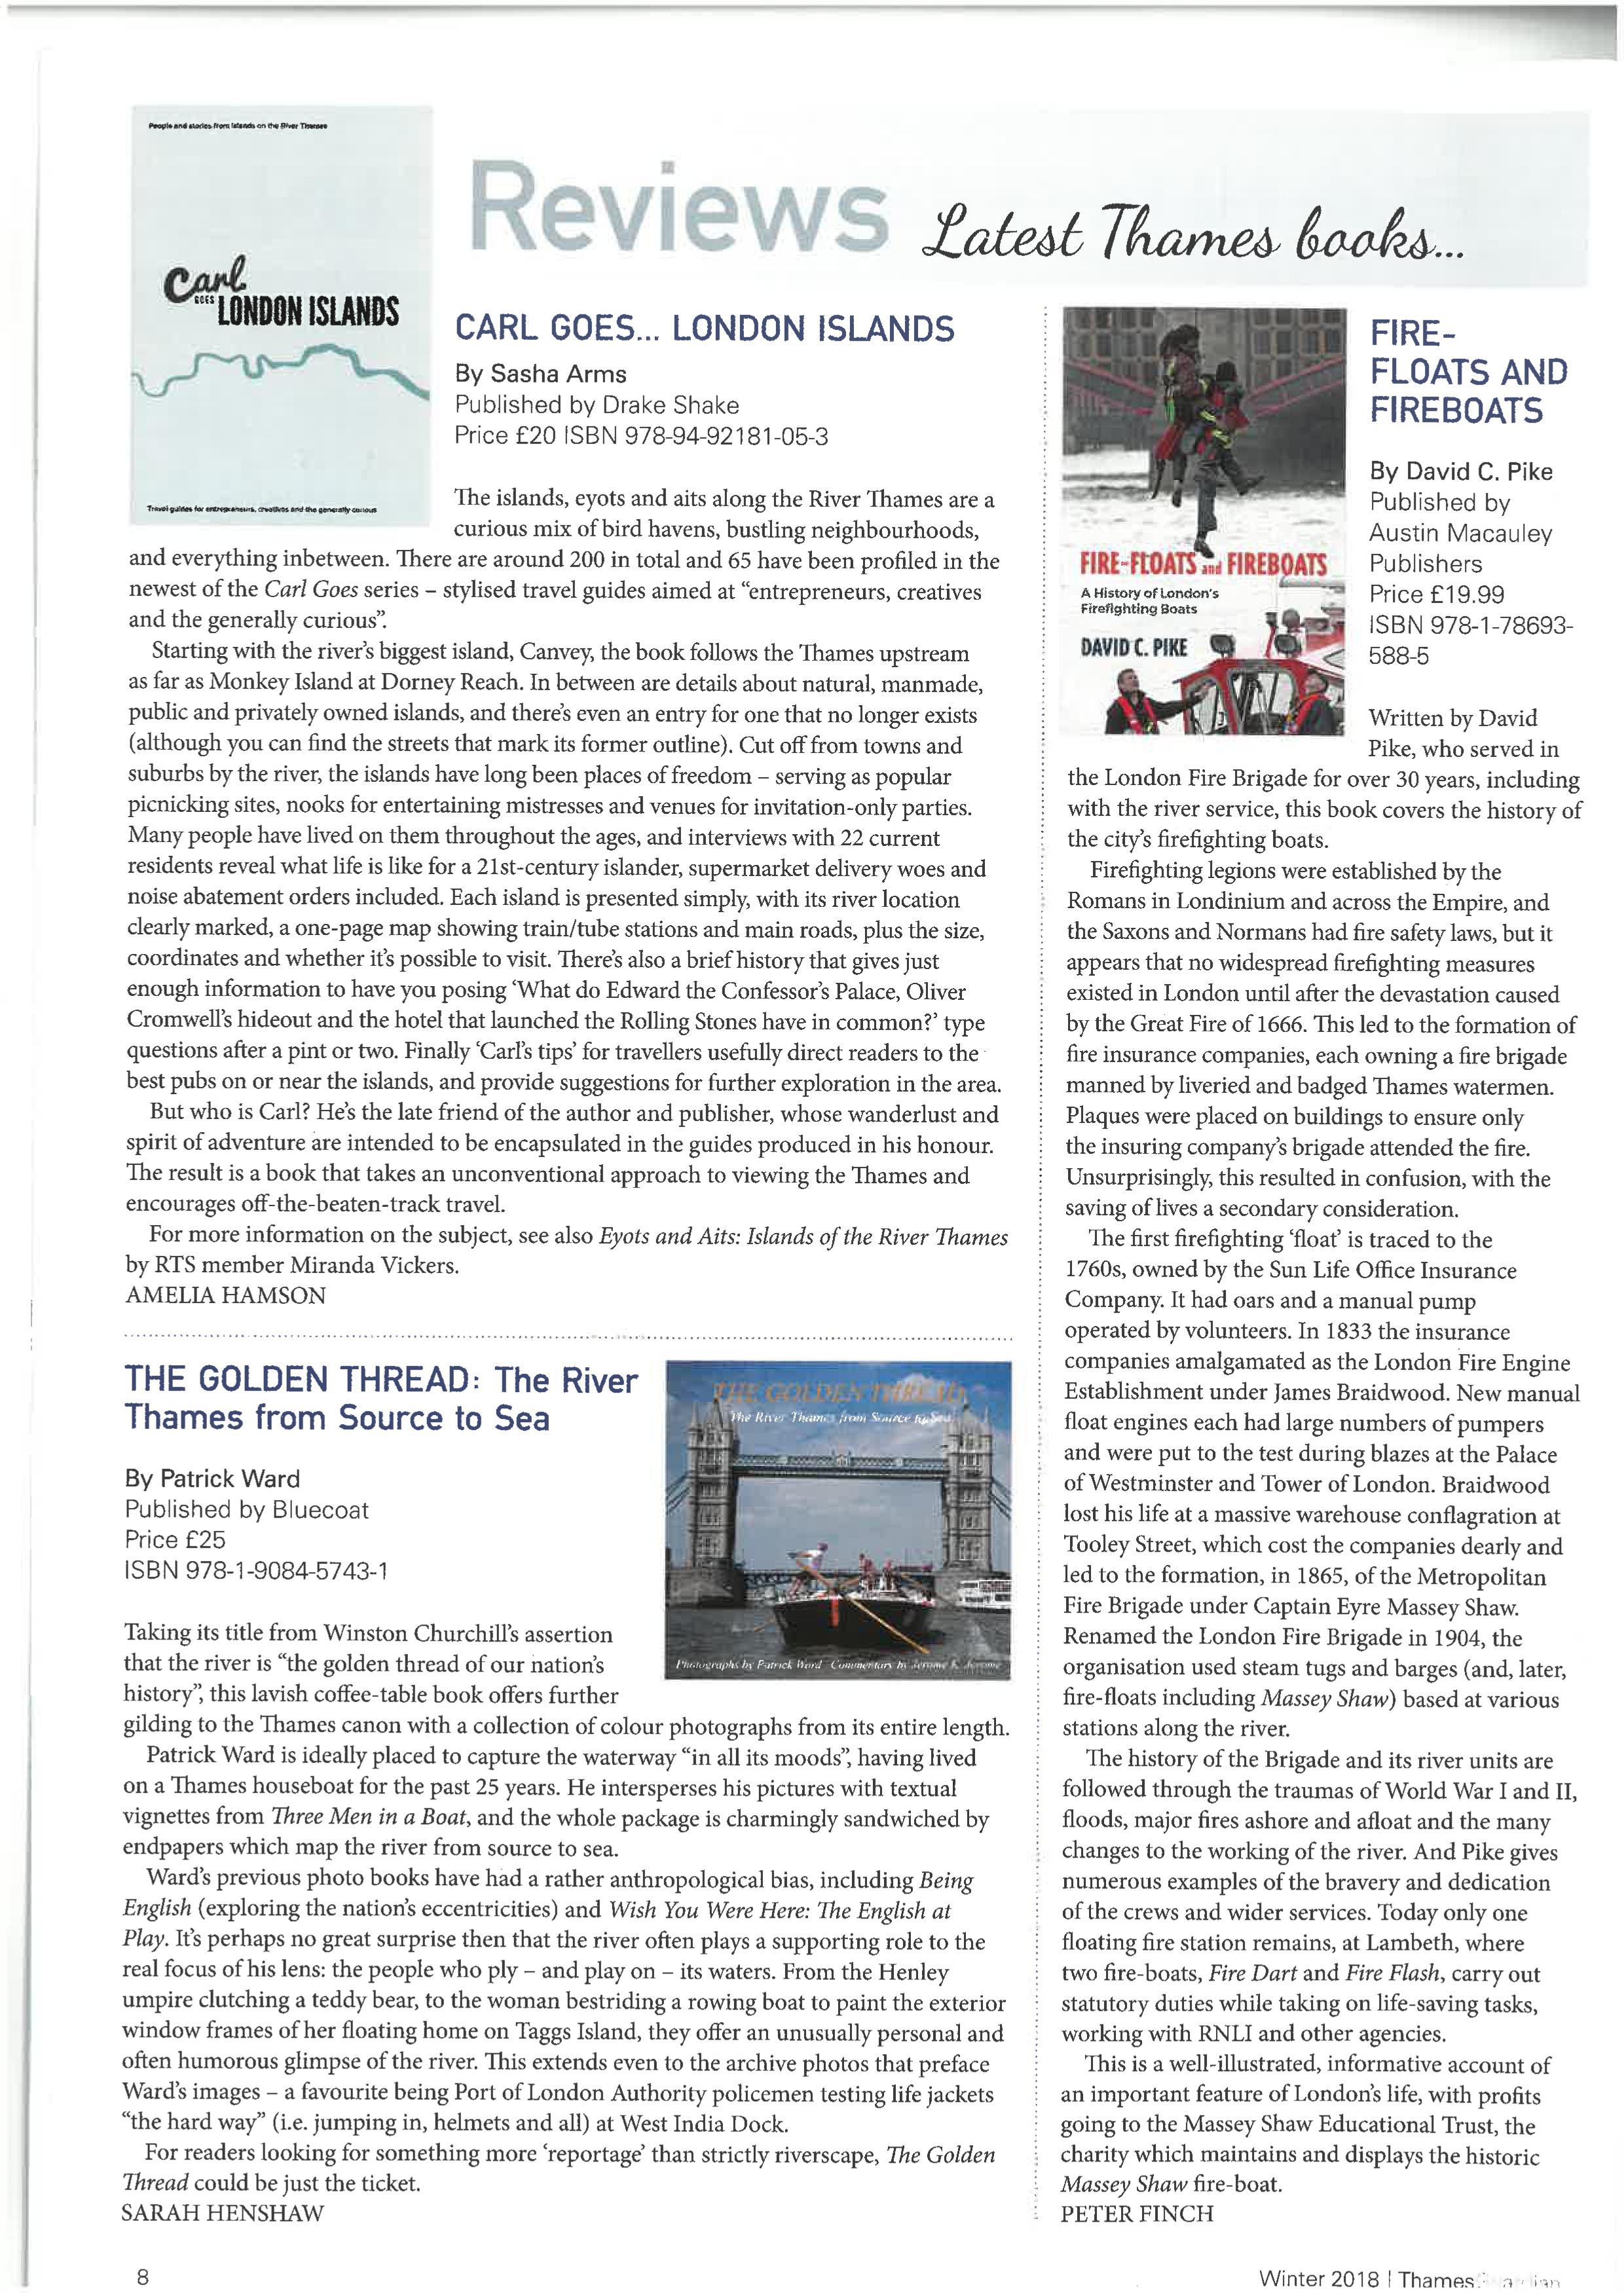 ‘Fire - Floats and Fireboats’ by David C. Pike reviewed by “Thames Guardian” magazine